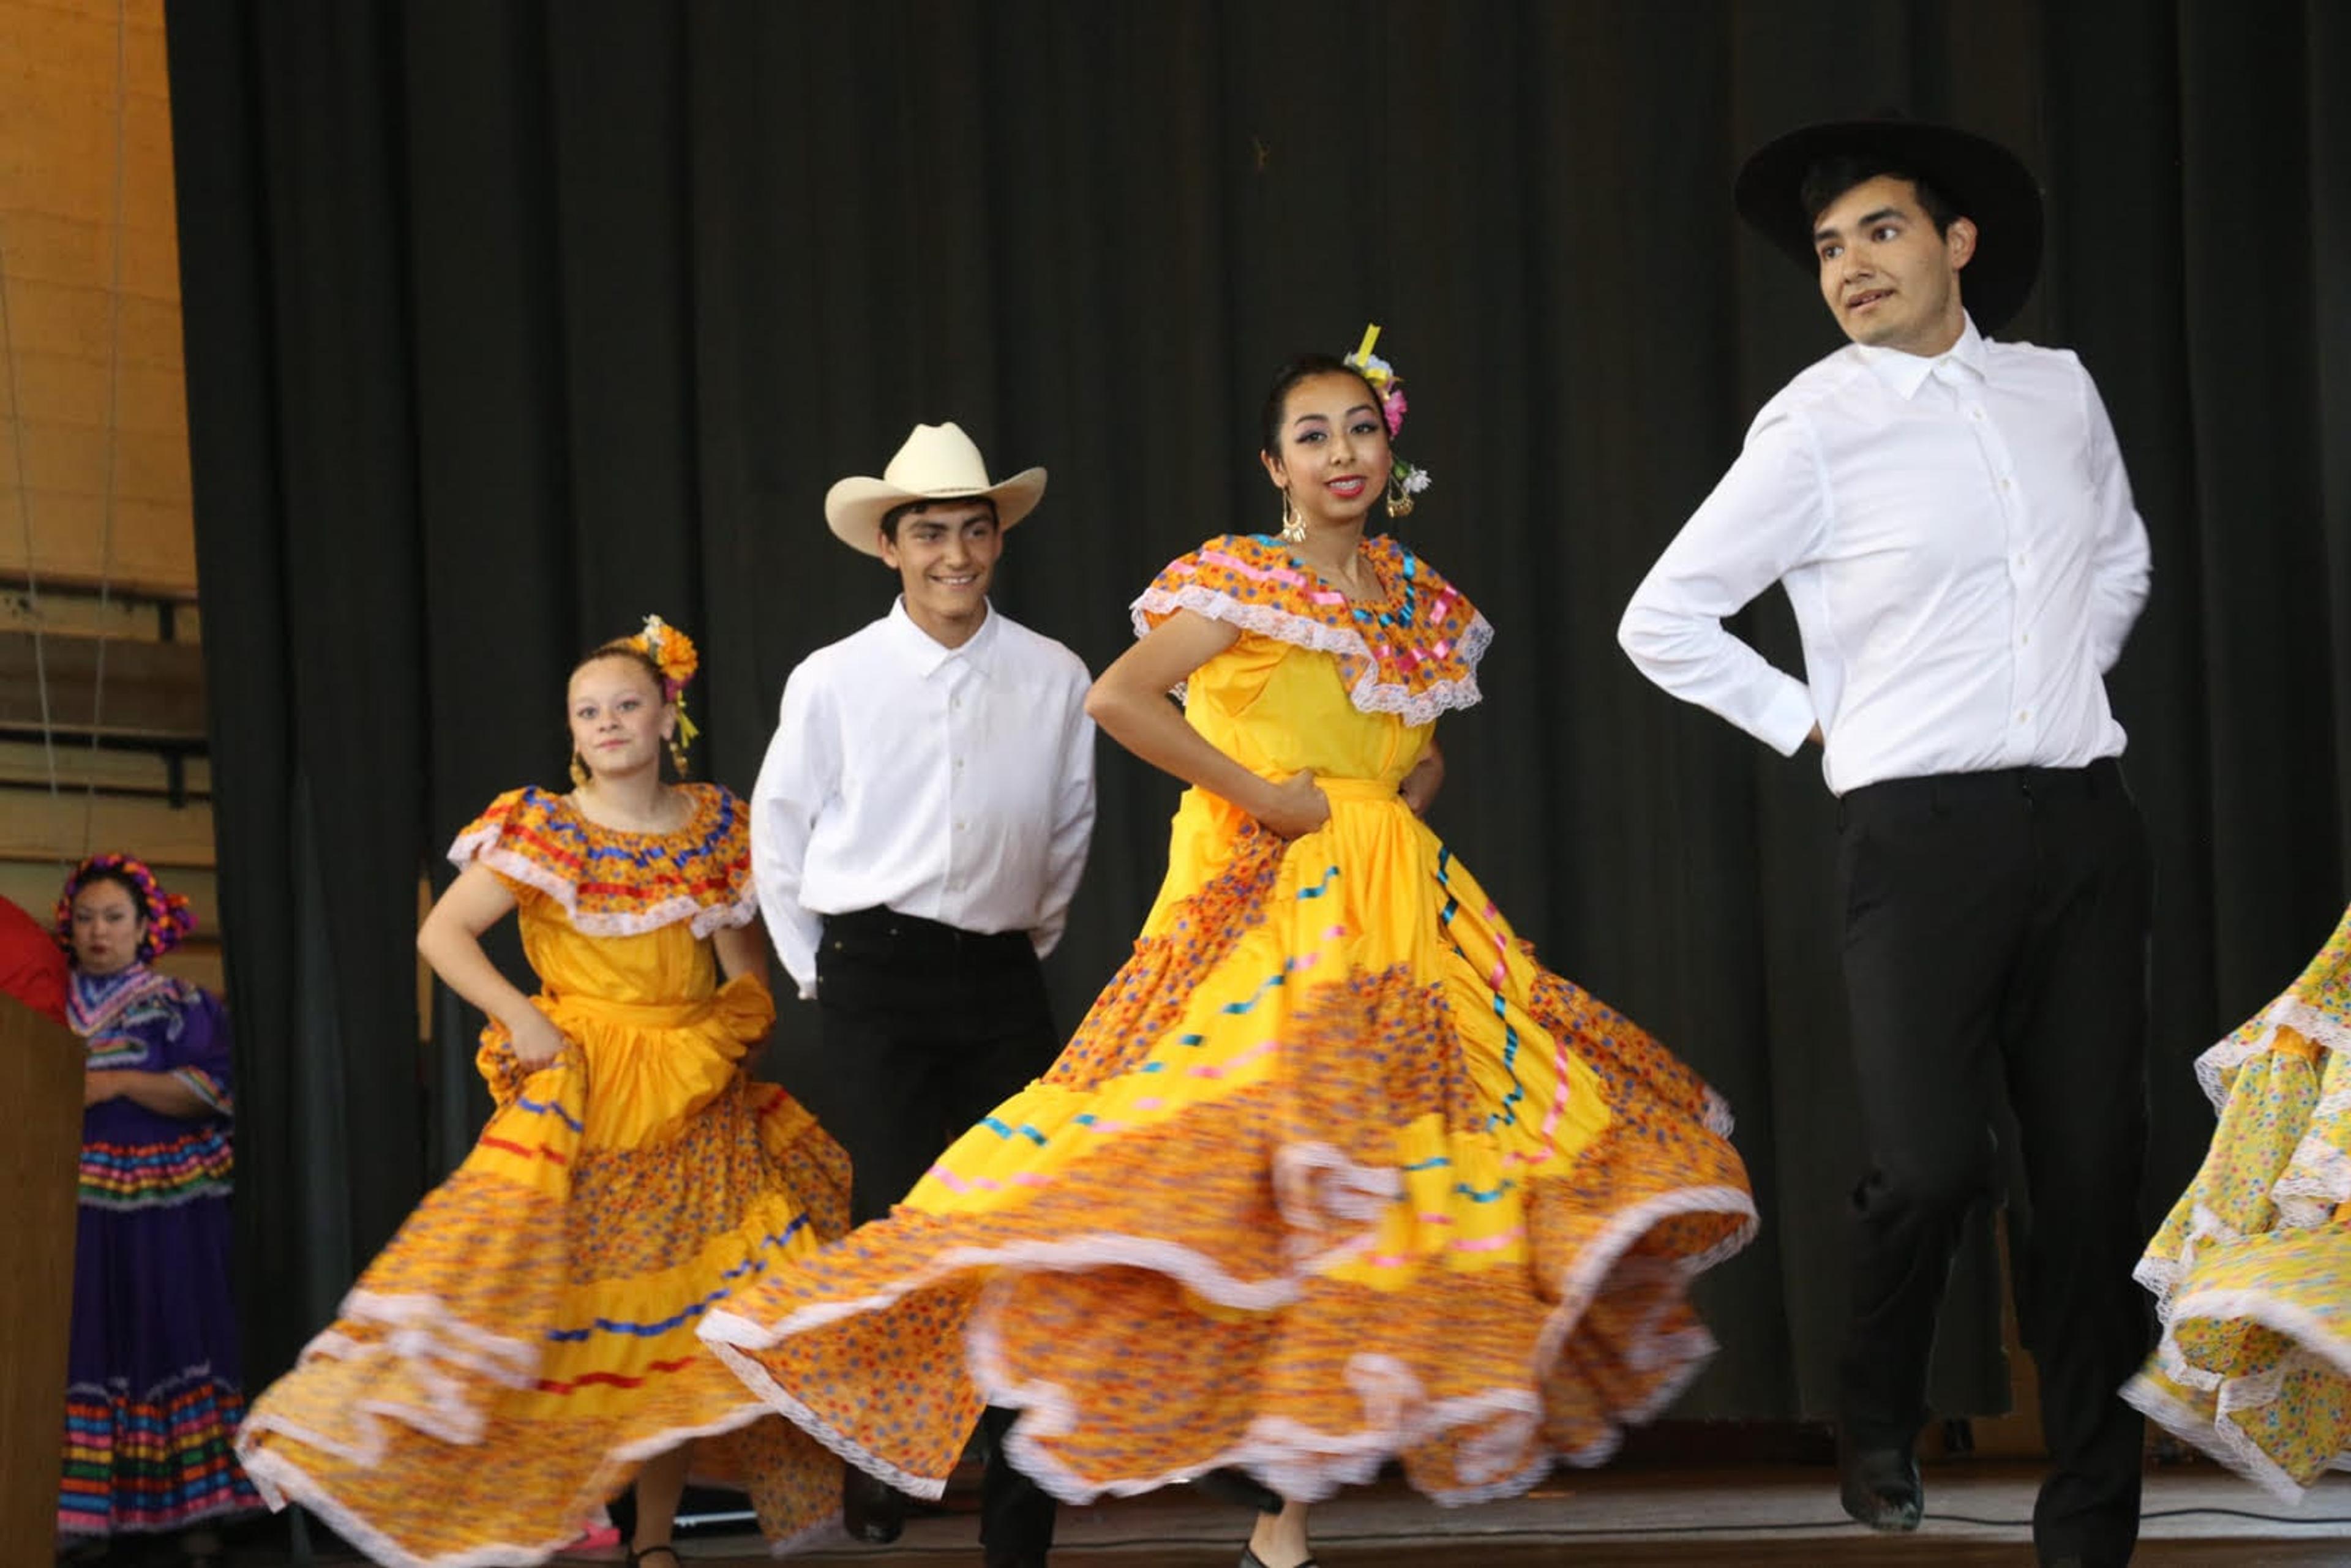 Holland’s Fiesta Raises Funds for Local Latino Community Needs